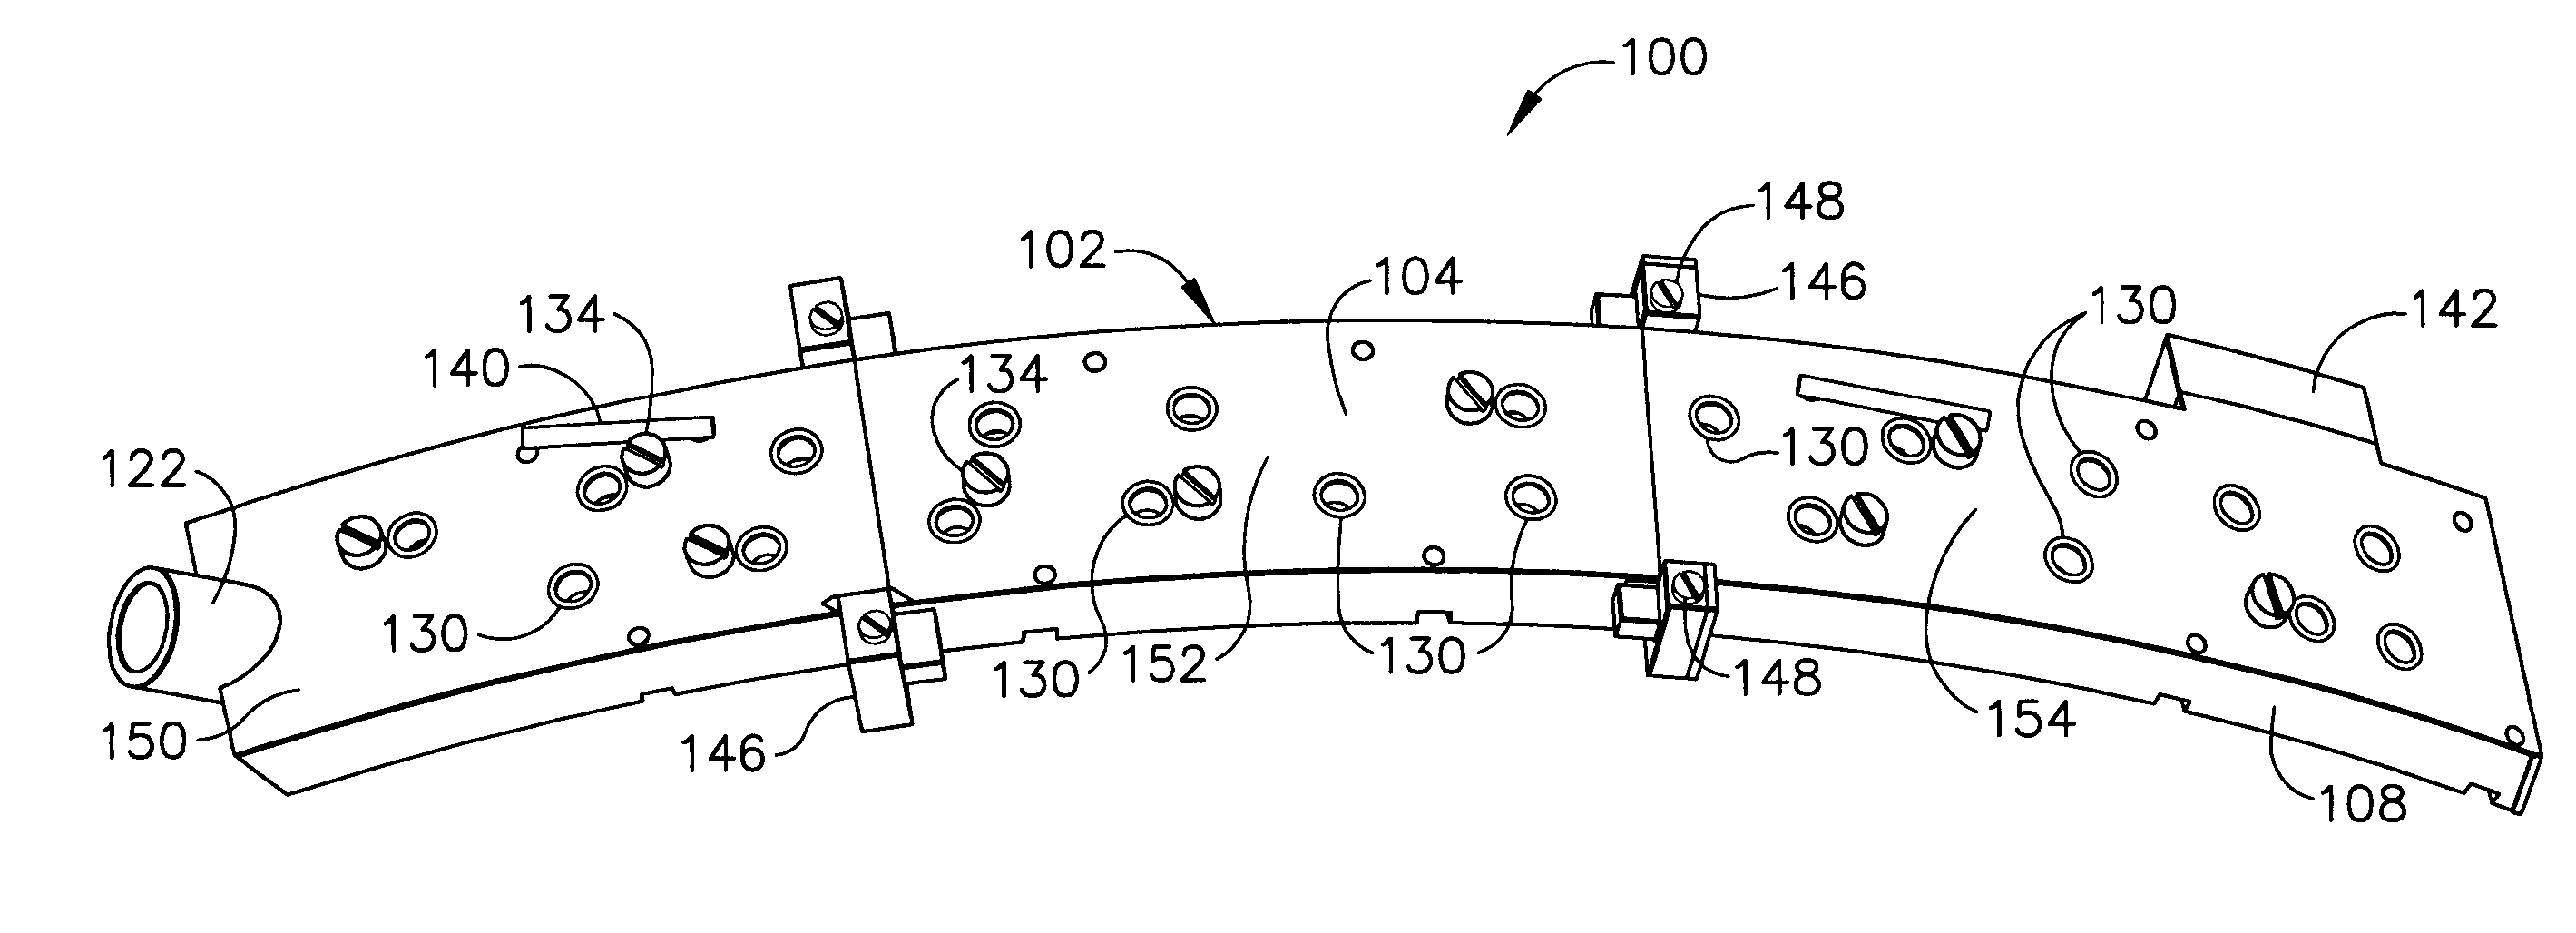 Drill template with integral vacuum attach